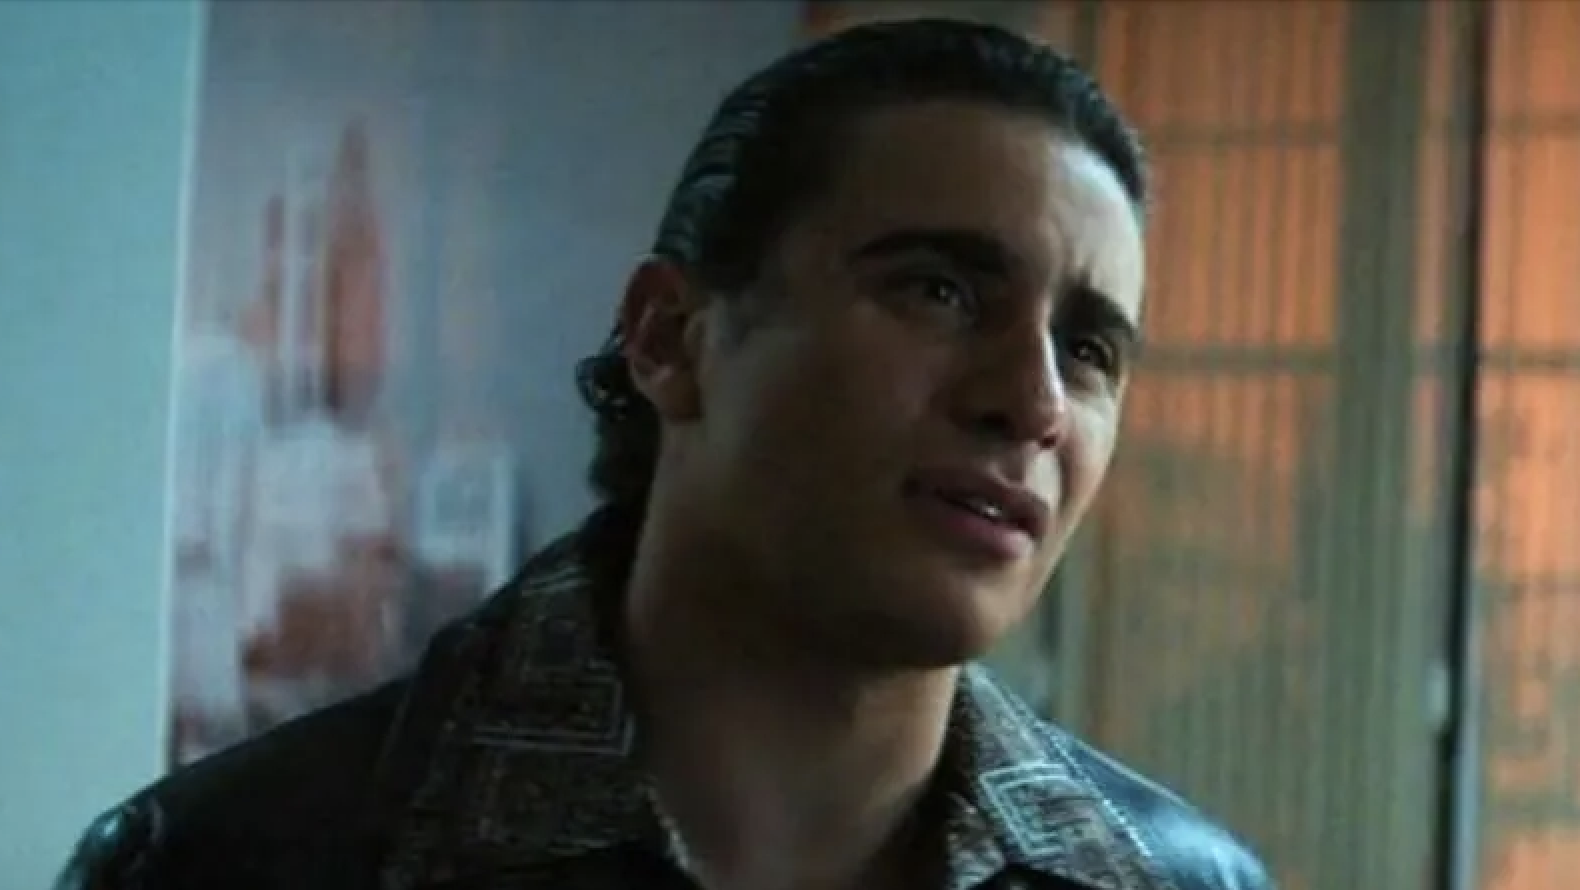 Close-up of Jake with slicked-back hair